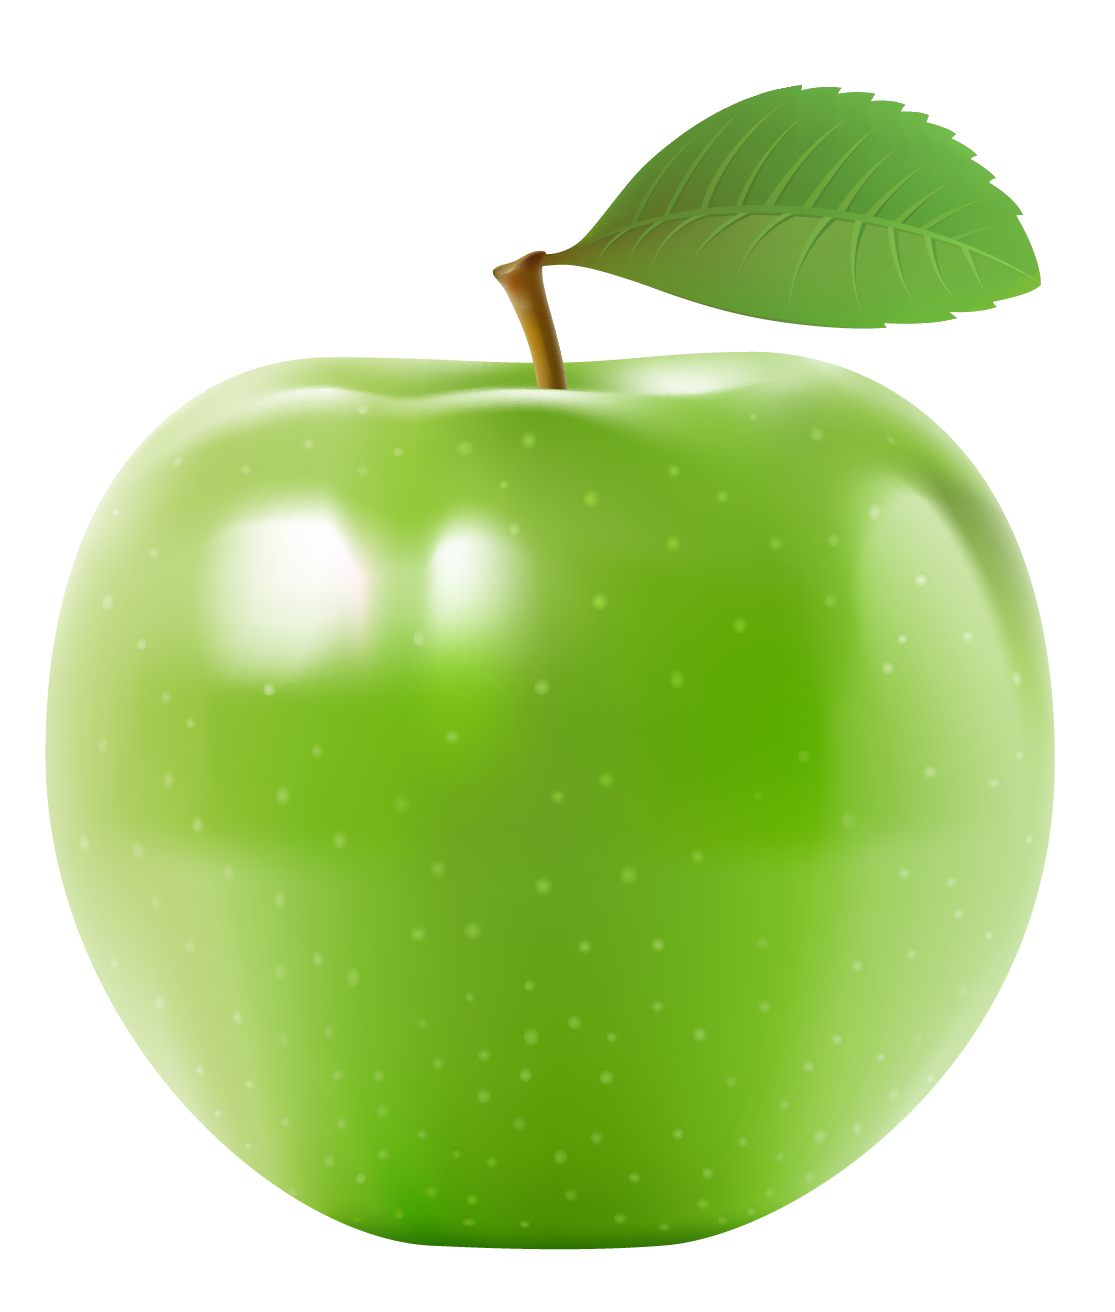 Green apple with leaf PNG